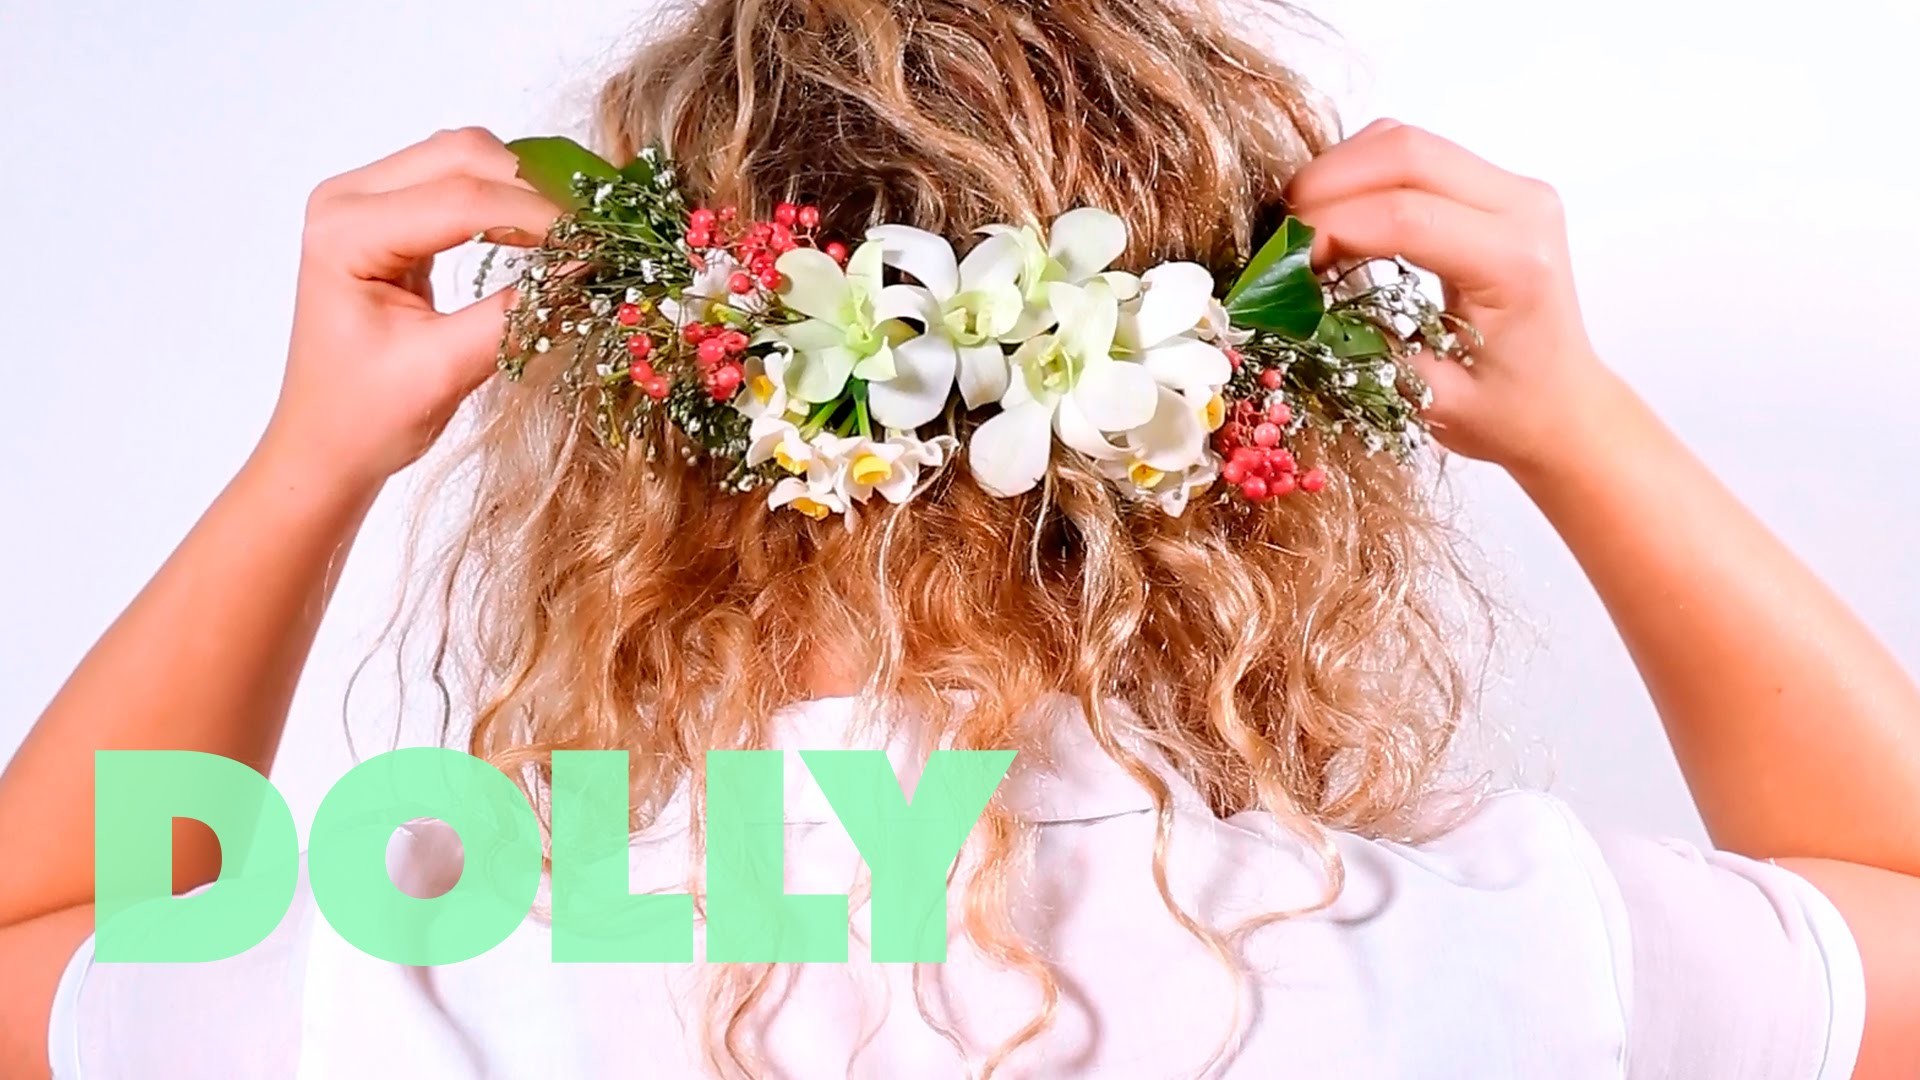 How-To: DOLLY's DIY formal prom floral crown | How-To Tuesdays